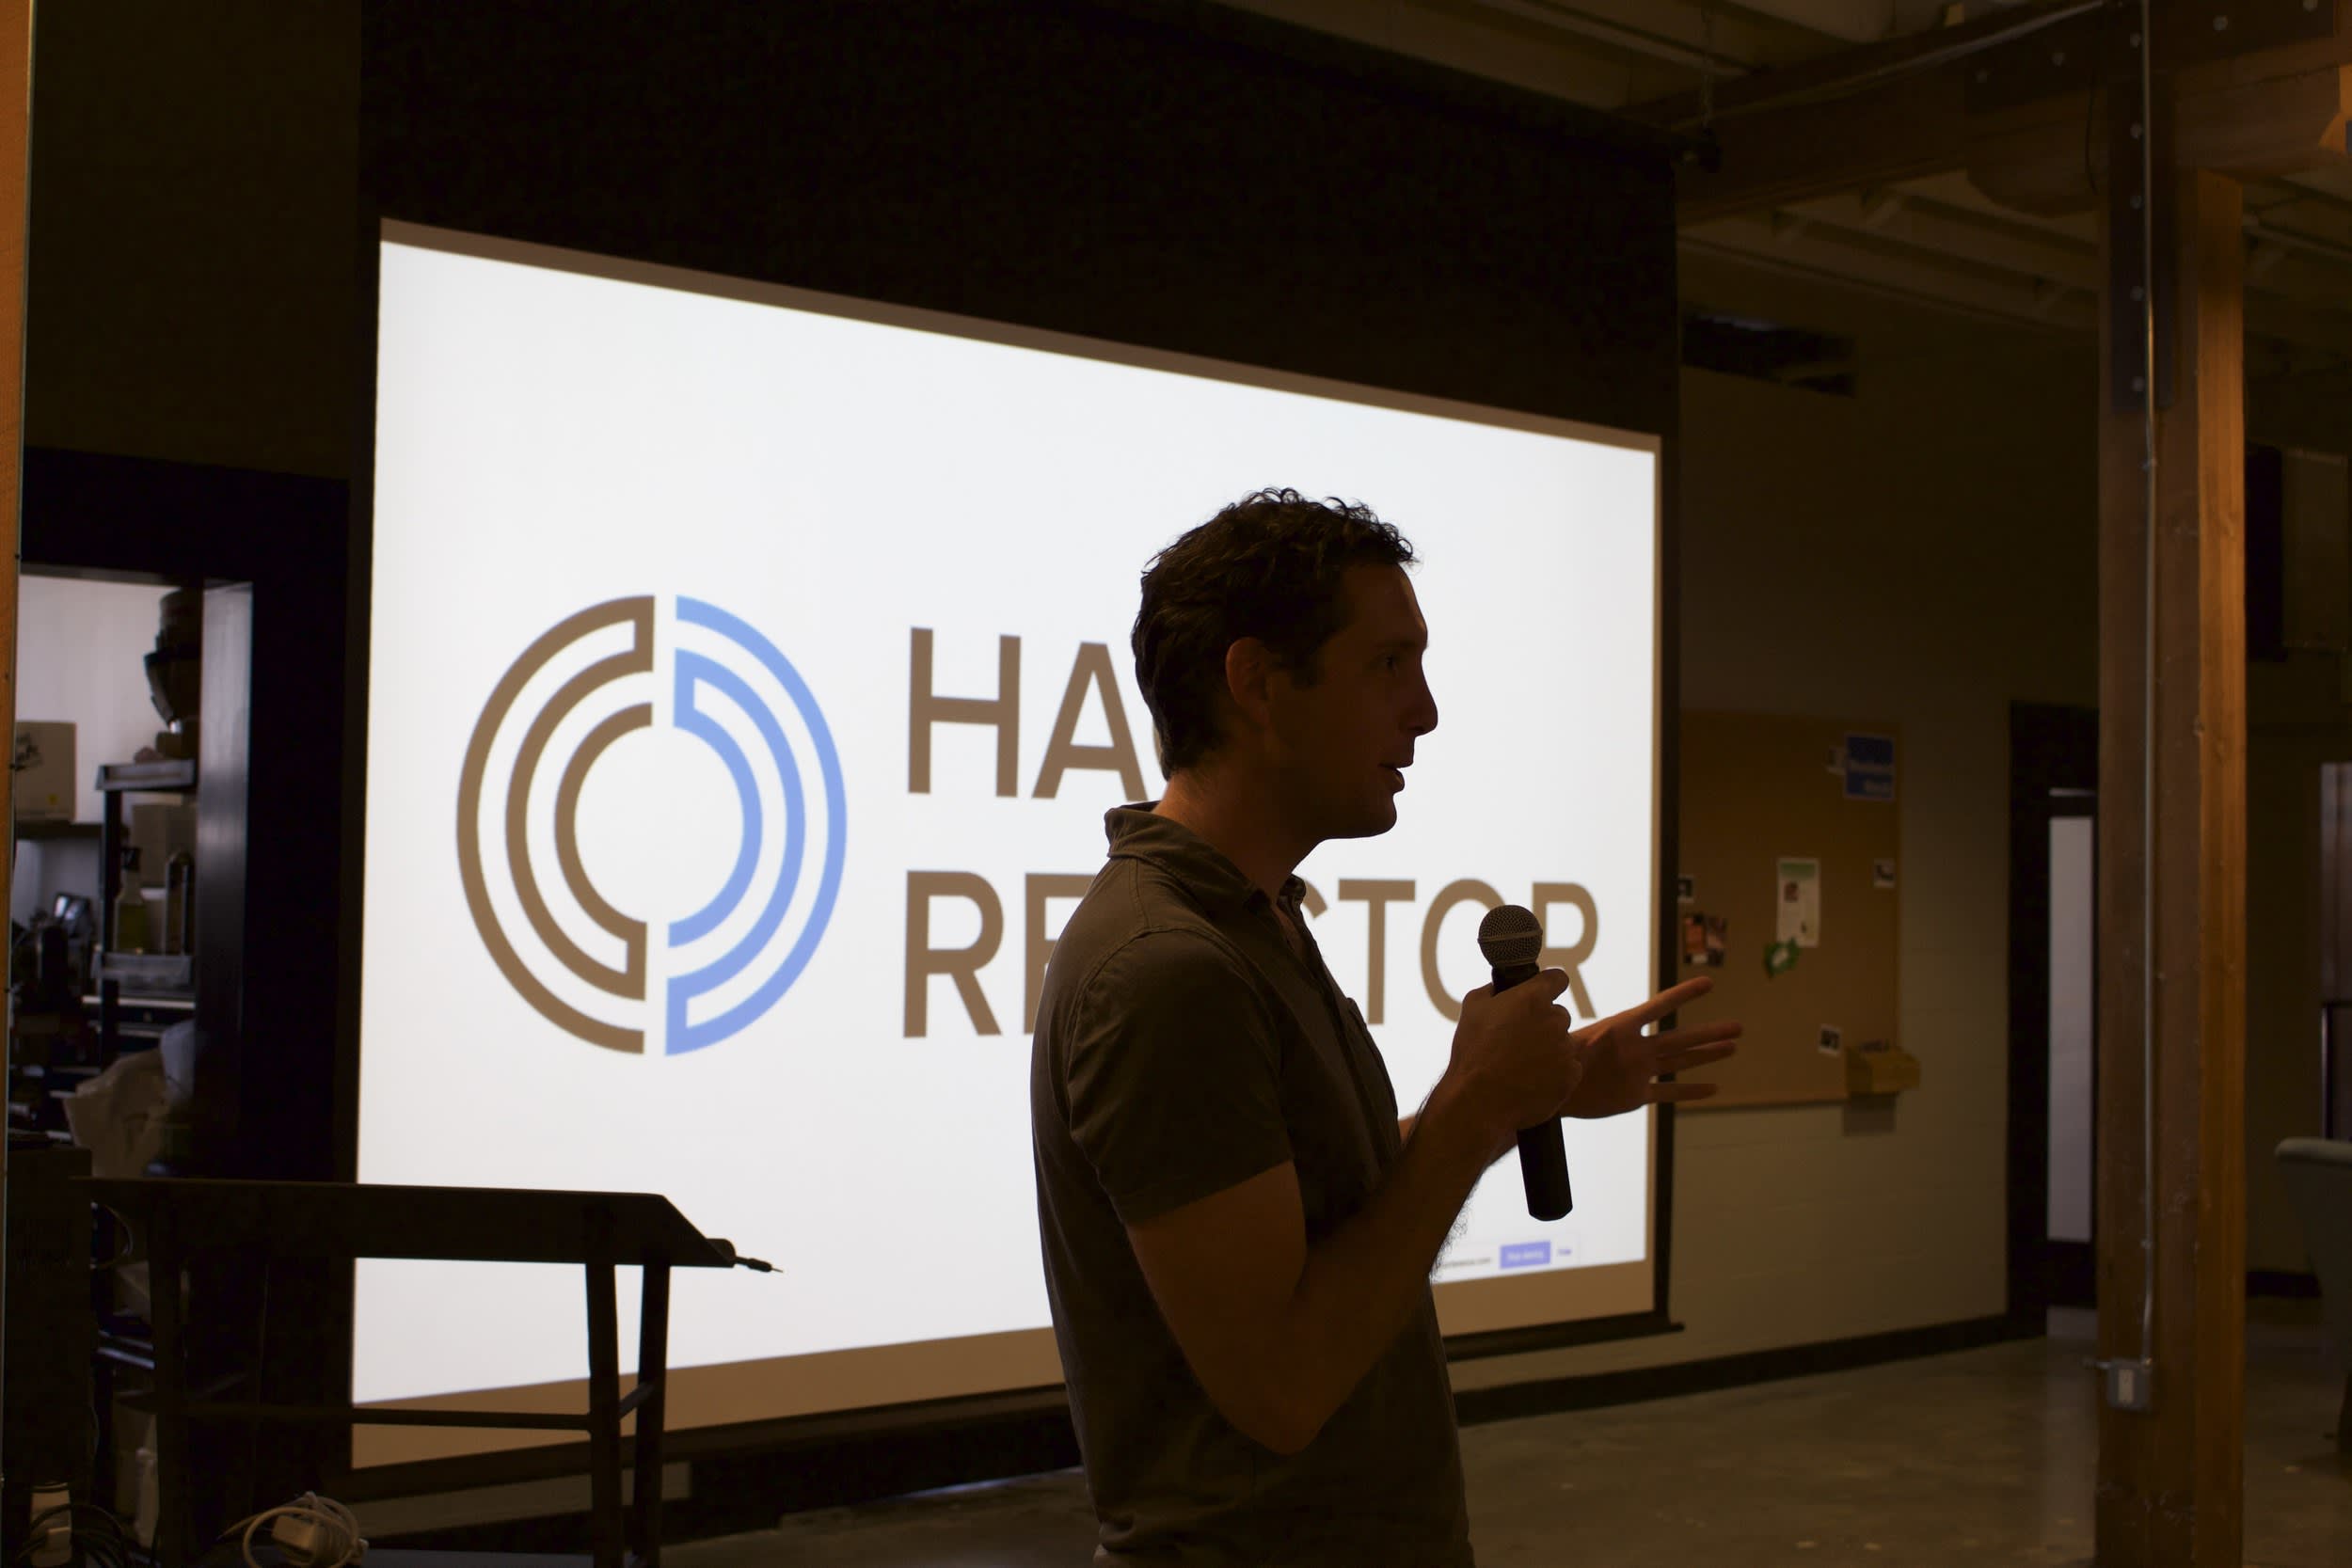 Cofounder Shawn Drost Discusses Initiative to Teach Prisoners to Code at Planet Labs Colloquium's Image